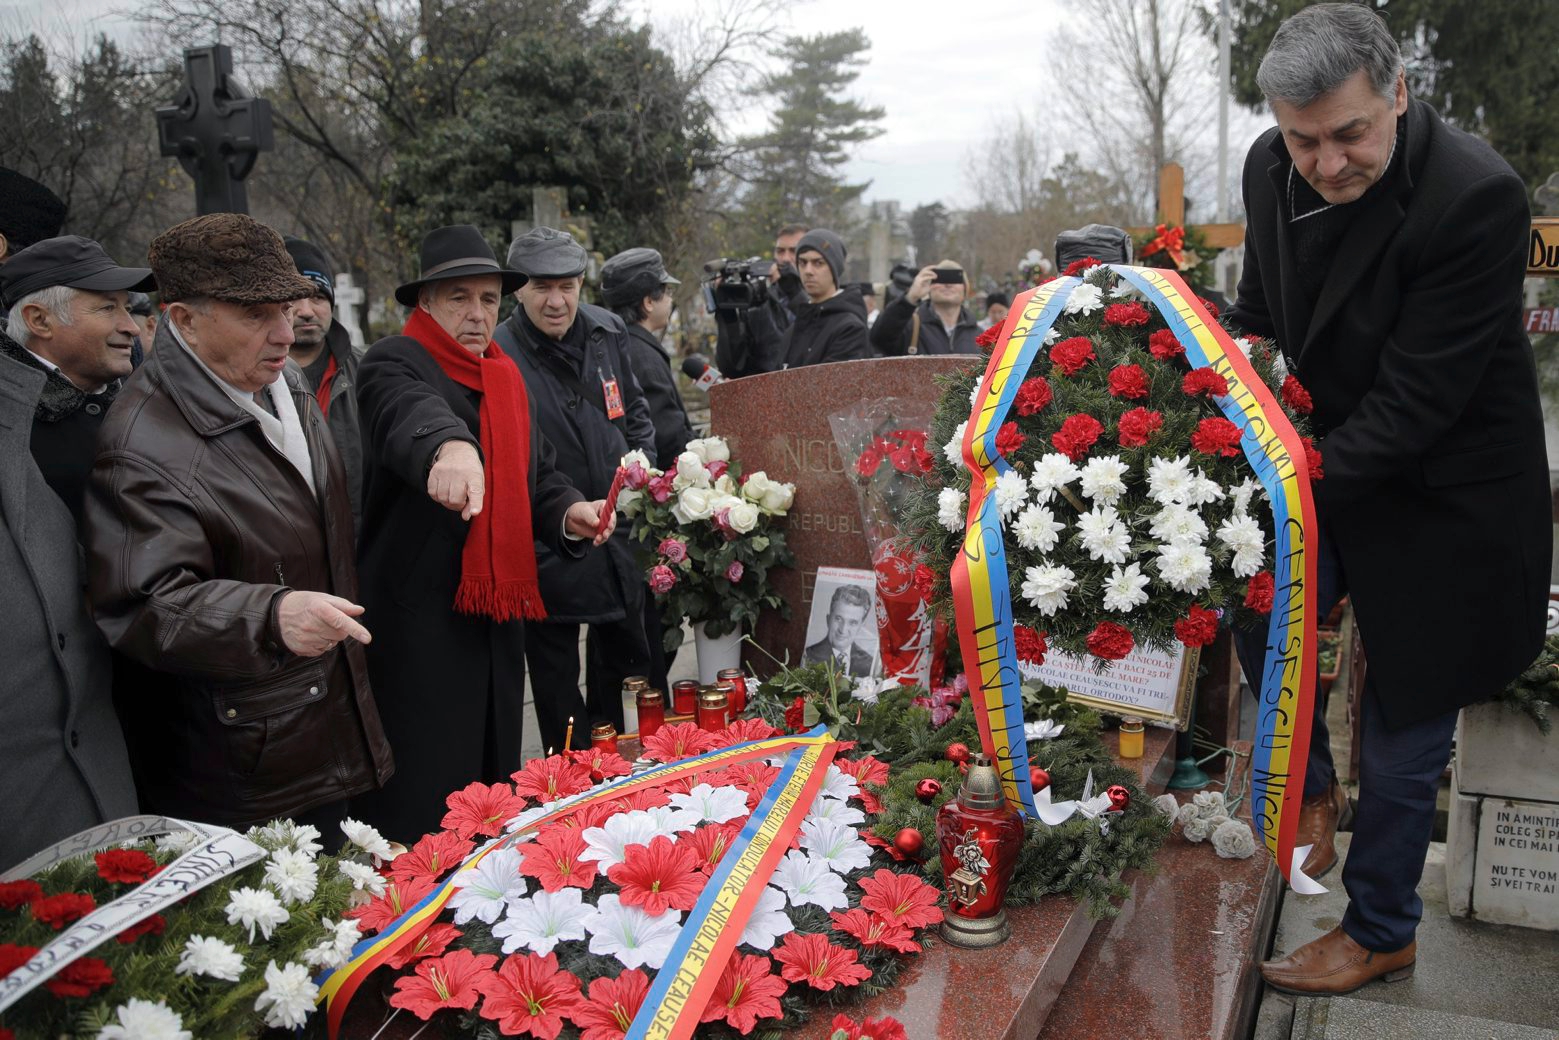 A man places a wreath at Romanian communist dictator Nicolae Ceausescu's grave, as communism nostalgics gather in Bucharest, Romania, Wednesday, Dec. 25, 2019, 30 years after he and his wife Elena were executed by firing squad on Christmas day 1989. Romania marks the 30th anniversary of the anti-communist uprising which started in the western Romanian town of Timisoara on Dec. 16 and in Bucharest on Dec. 21, 1989, left more than one thousand people dead and ended the rule of dictator Nicolae Ceausescu. (AP Photo/Vadim Ghirda) Romania Ceausescu Revolution 30th Anniversary